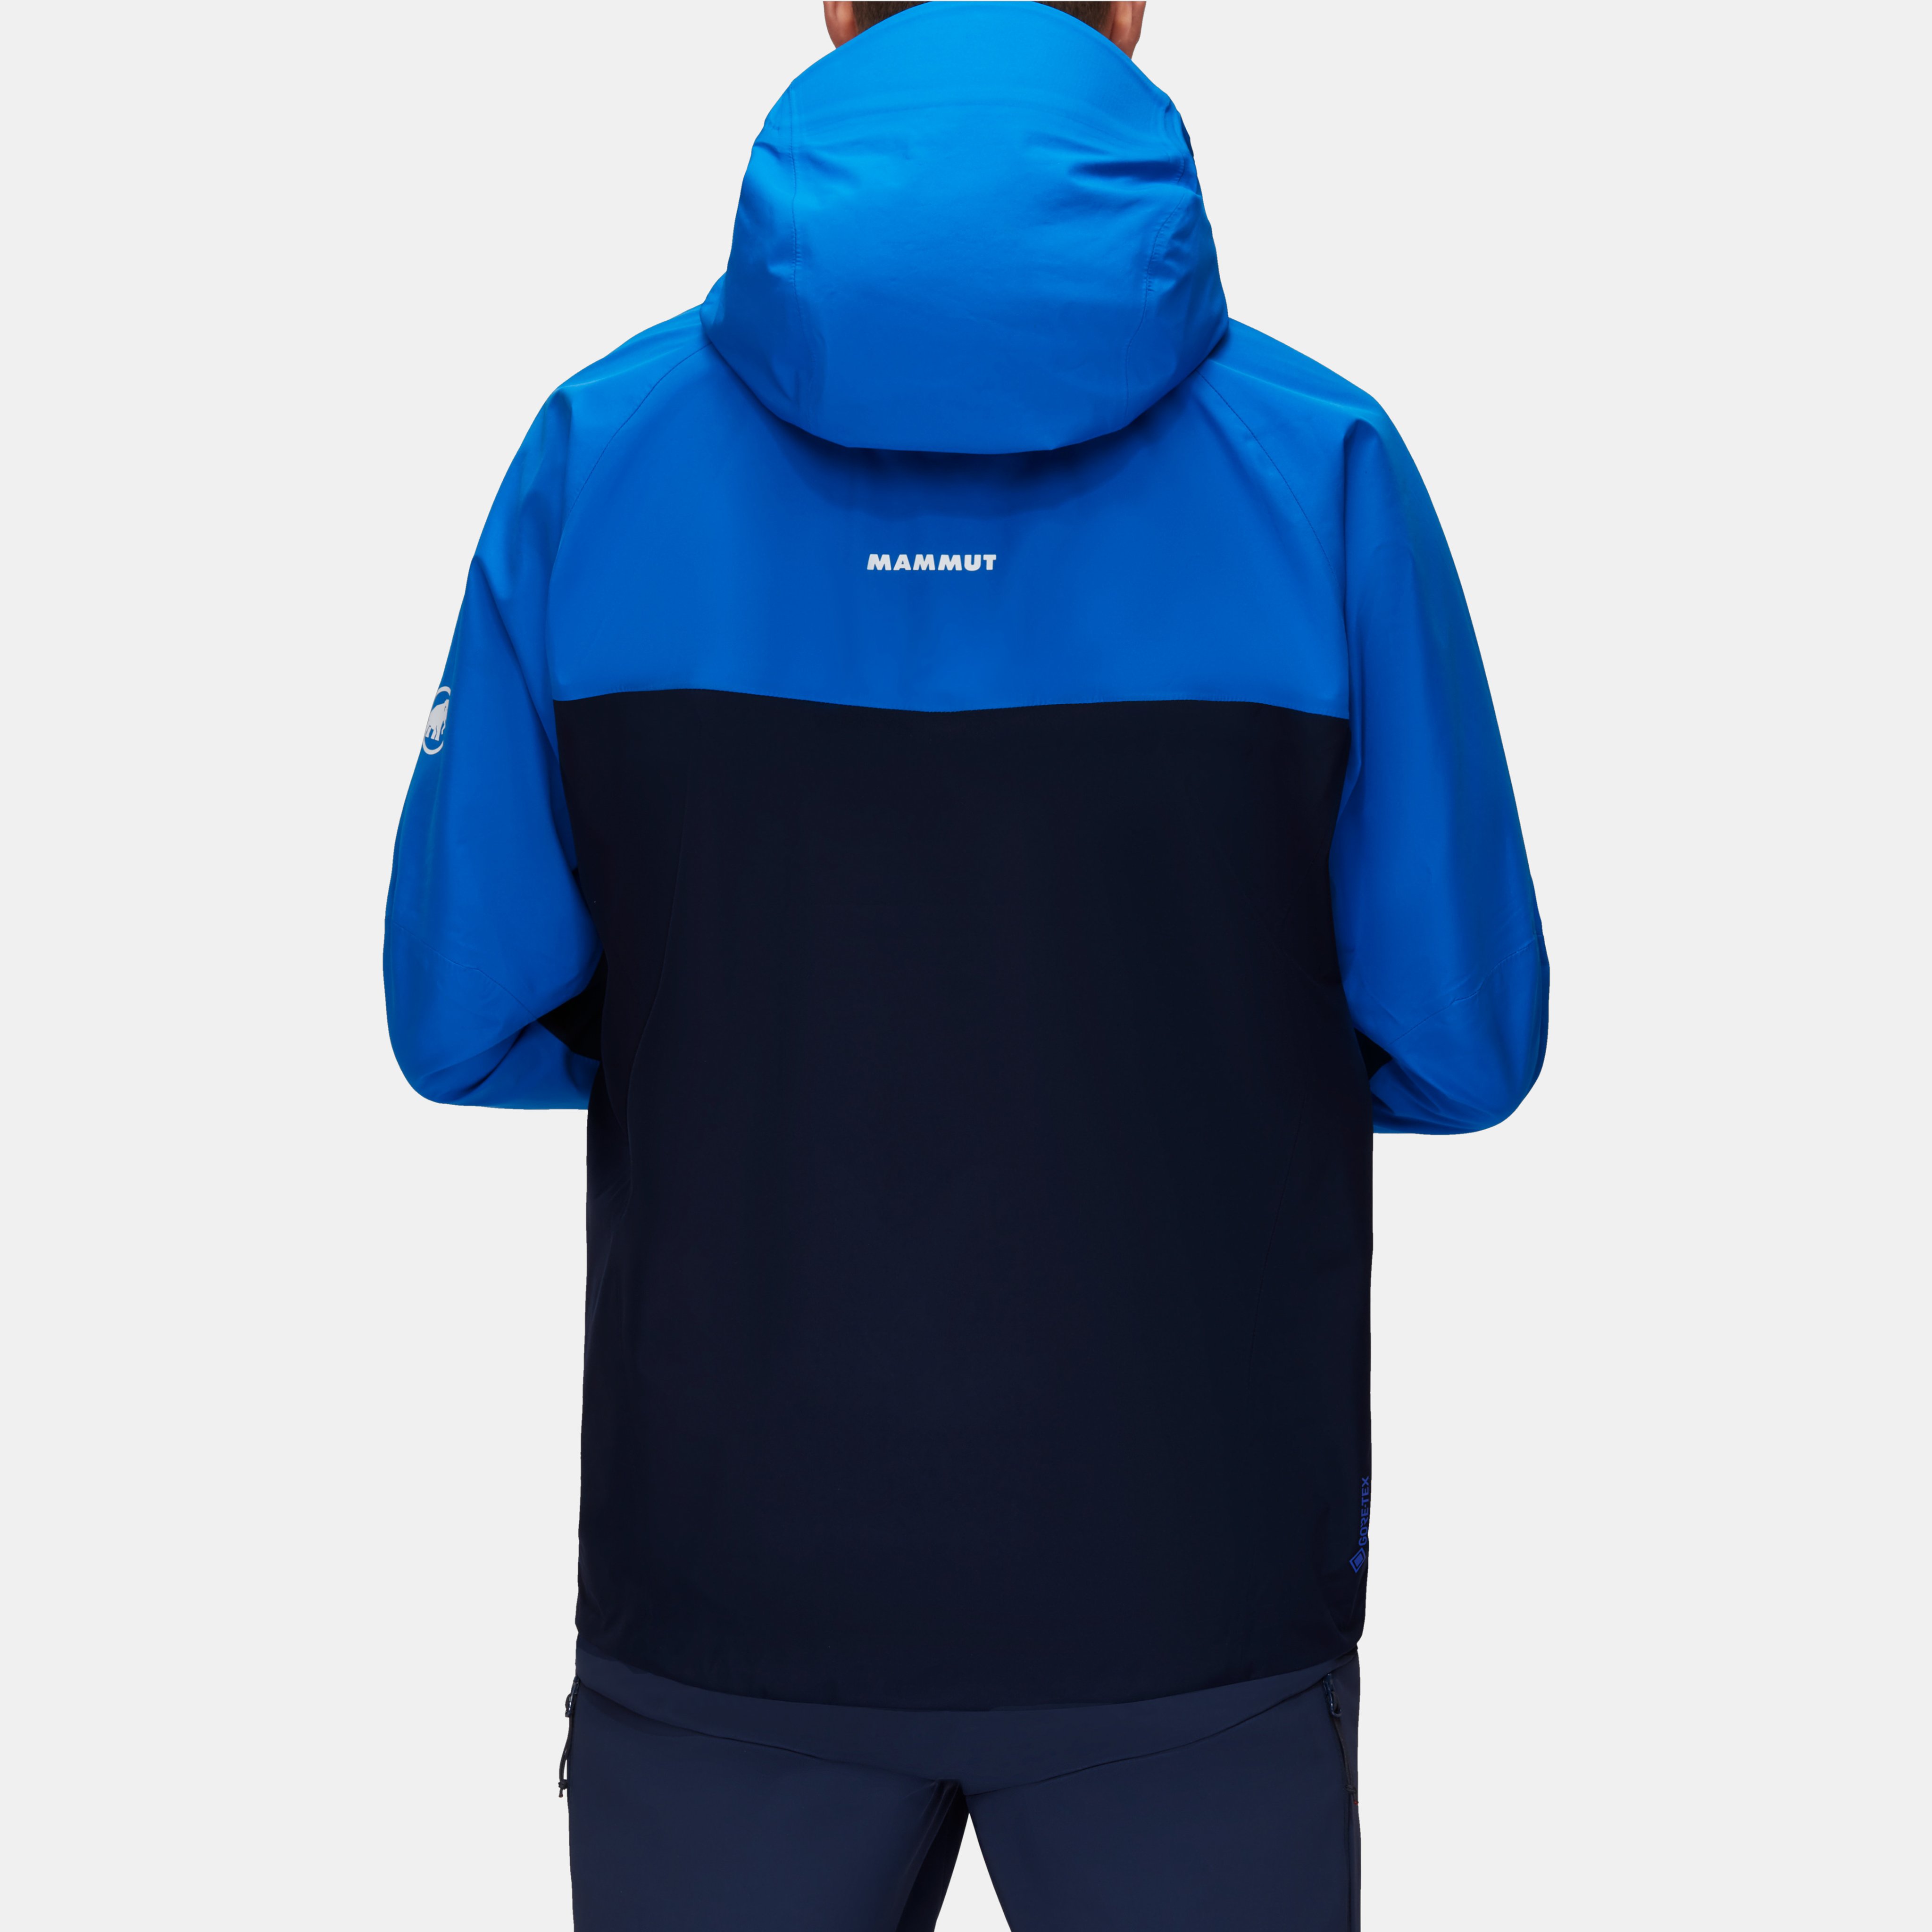 Crater HS Hooded Jacket Men product image